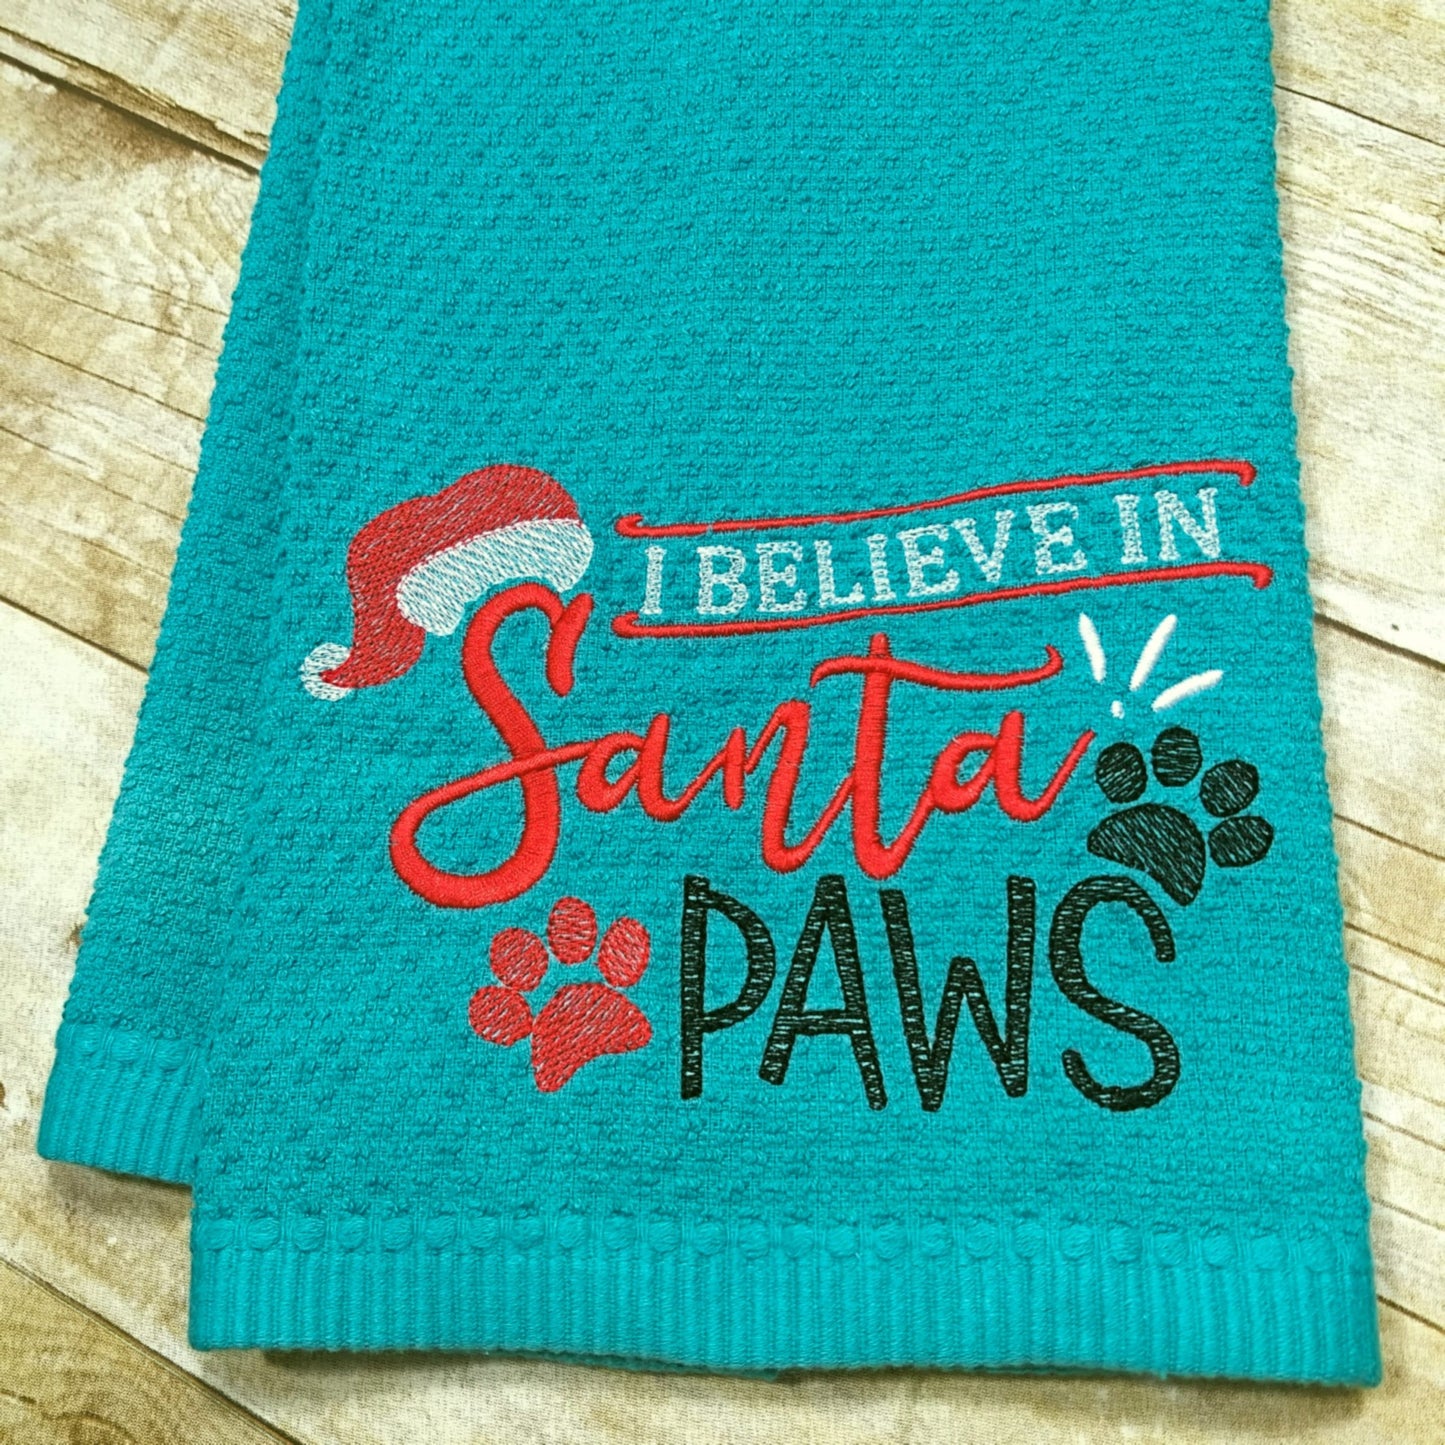 I Believe In Santa Paws - 2 Sizes - Digital Embroidery Design